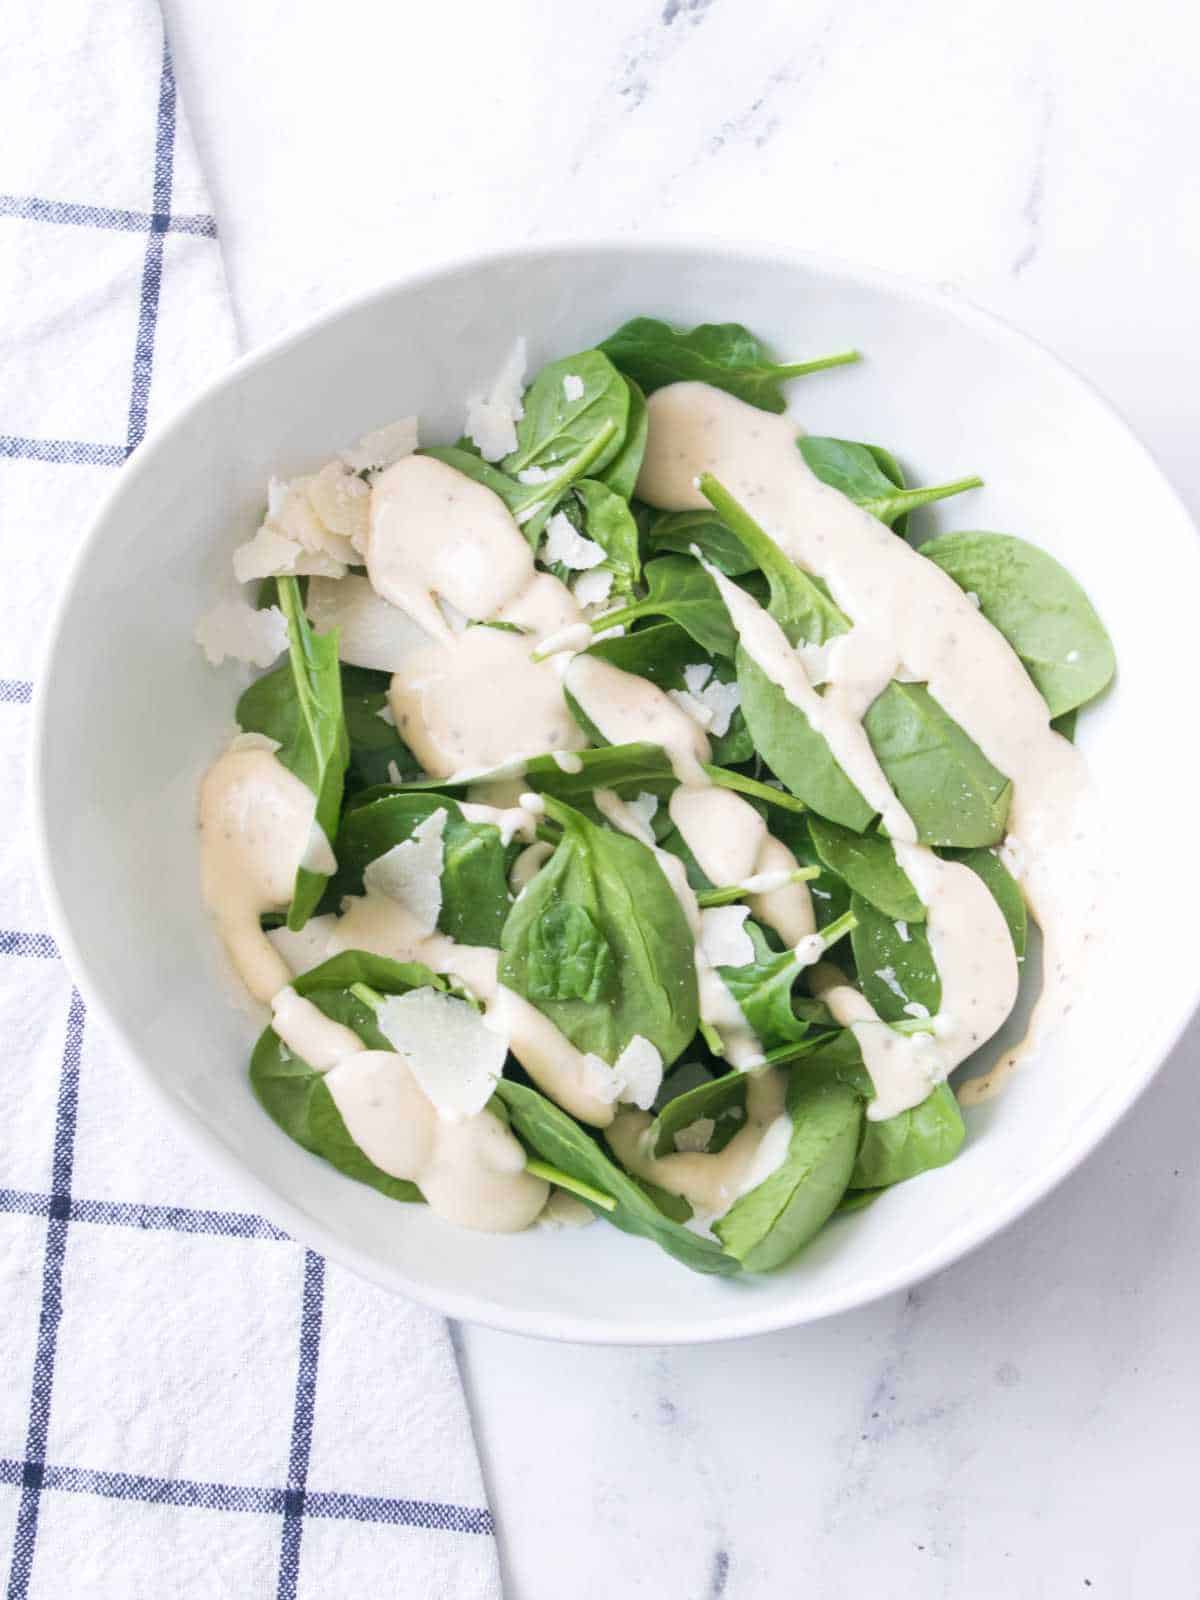 crisp romaine and spinach in a bowl with dressing.